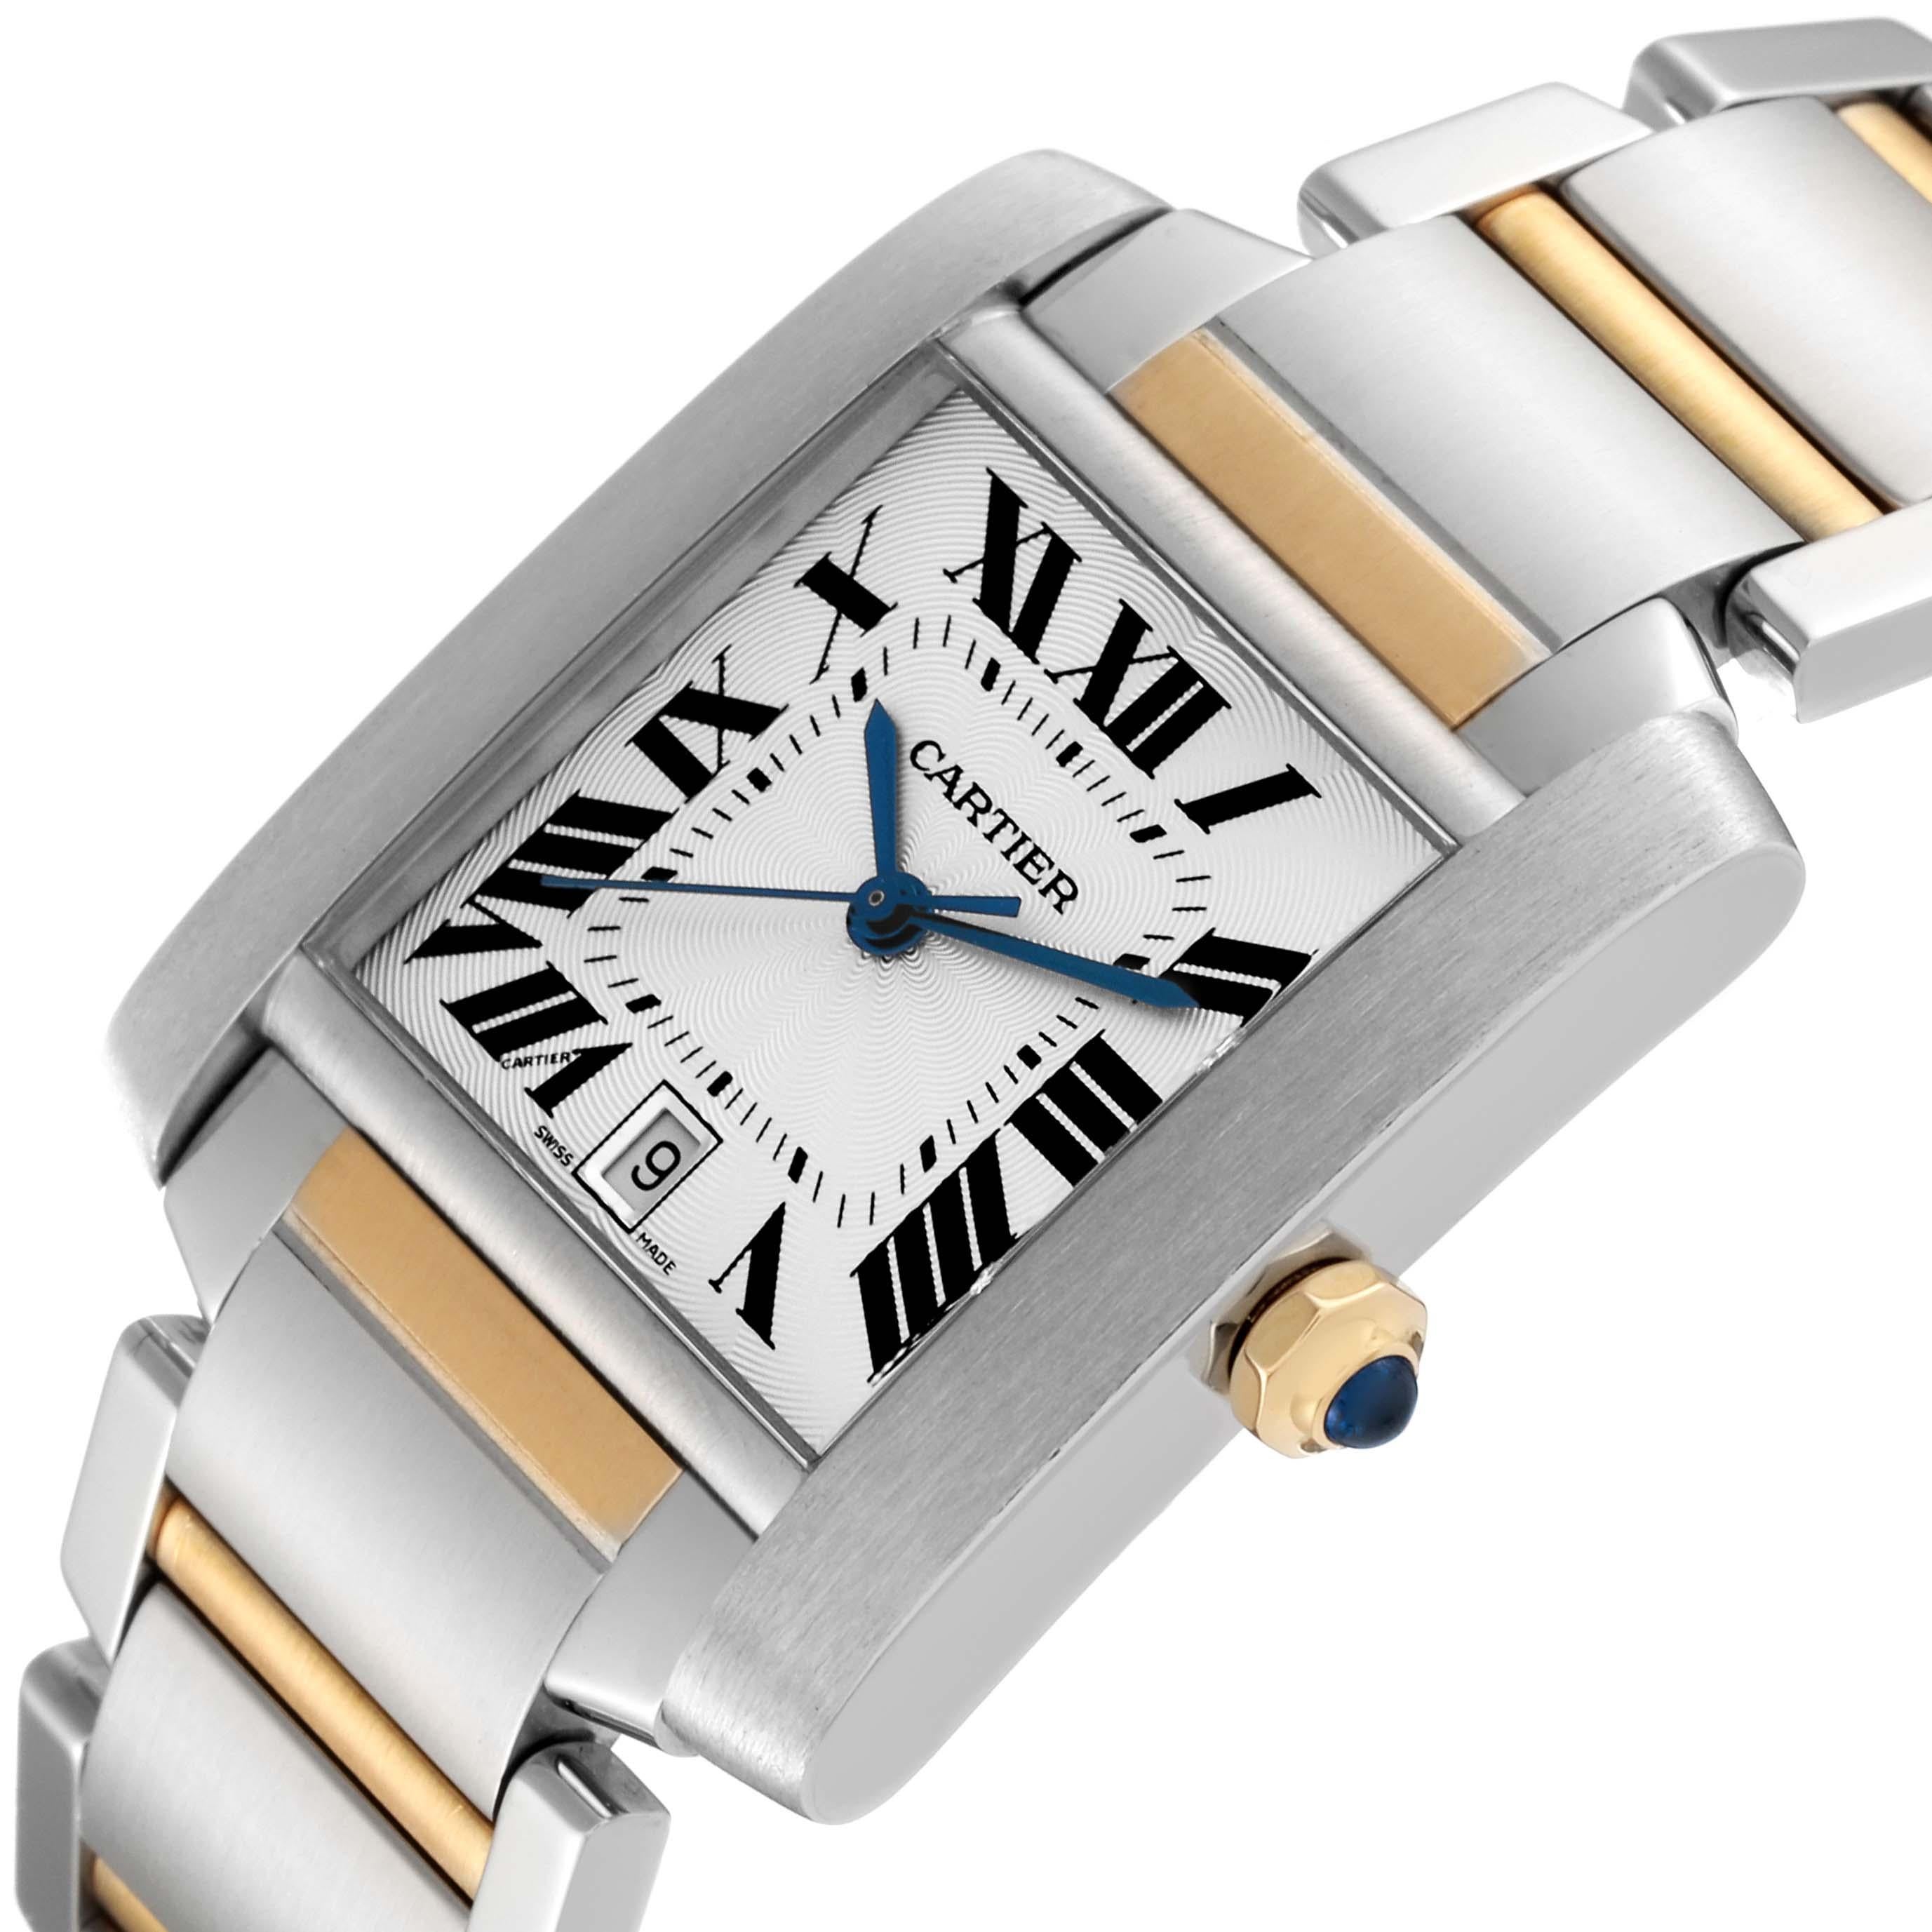 Cartier Tank Francaise Steel Yellow Gold Silver Dial Mens Watch W51005Q4 1